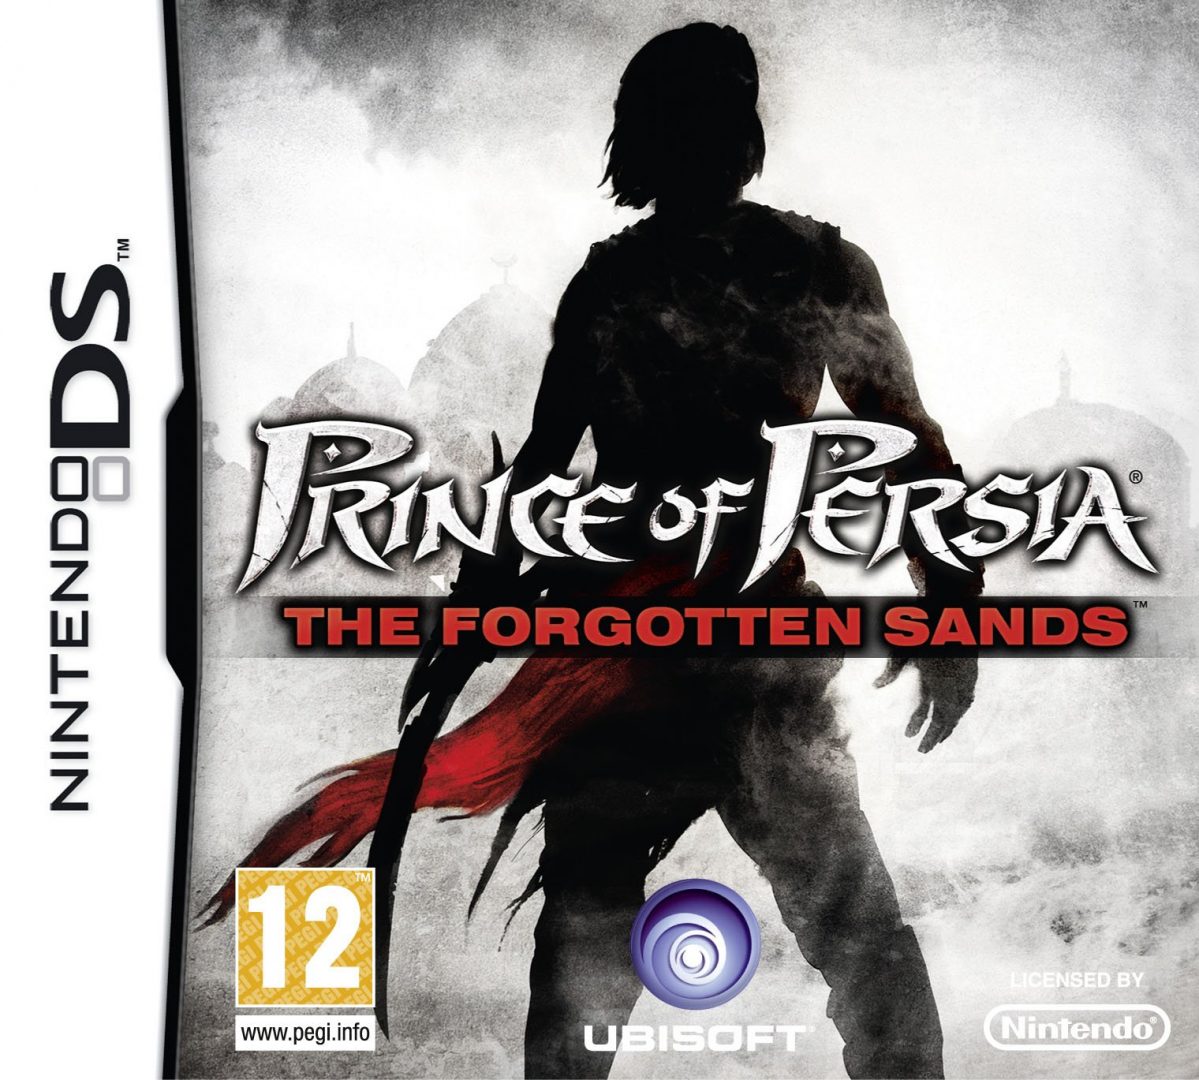 The coverart image of Prince of Persia: The Forgotten Sands